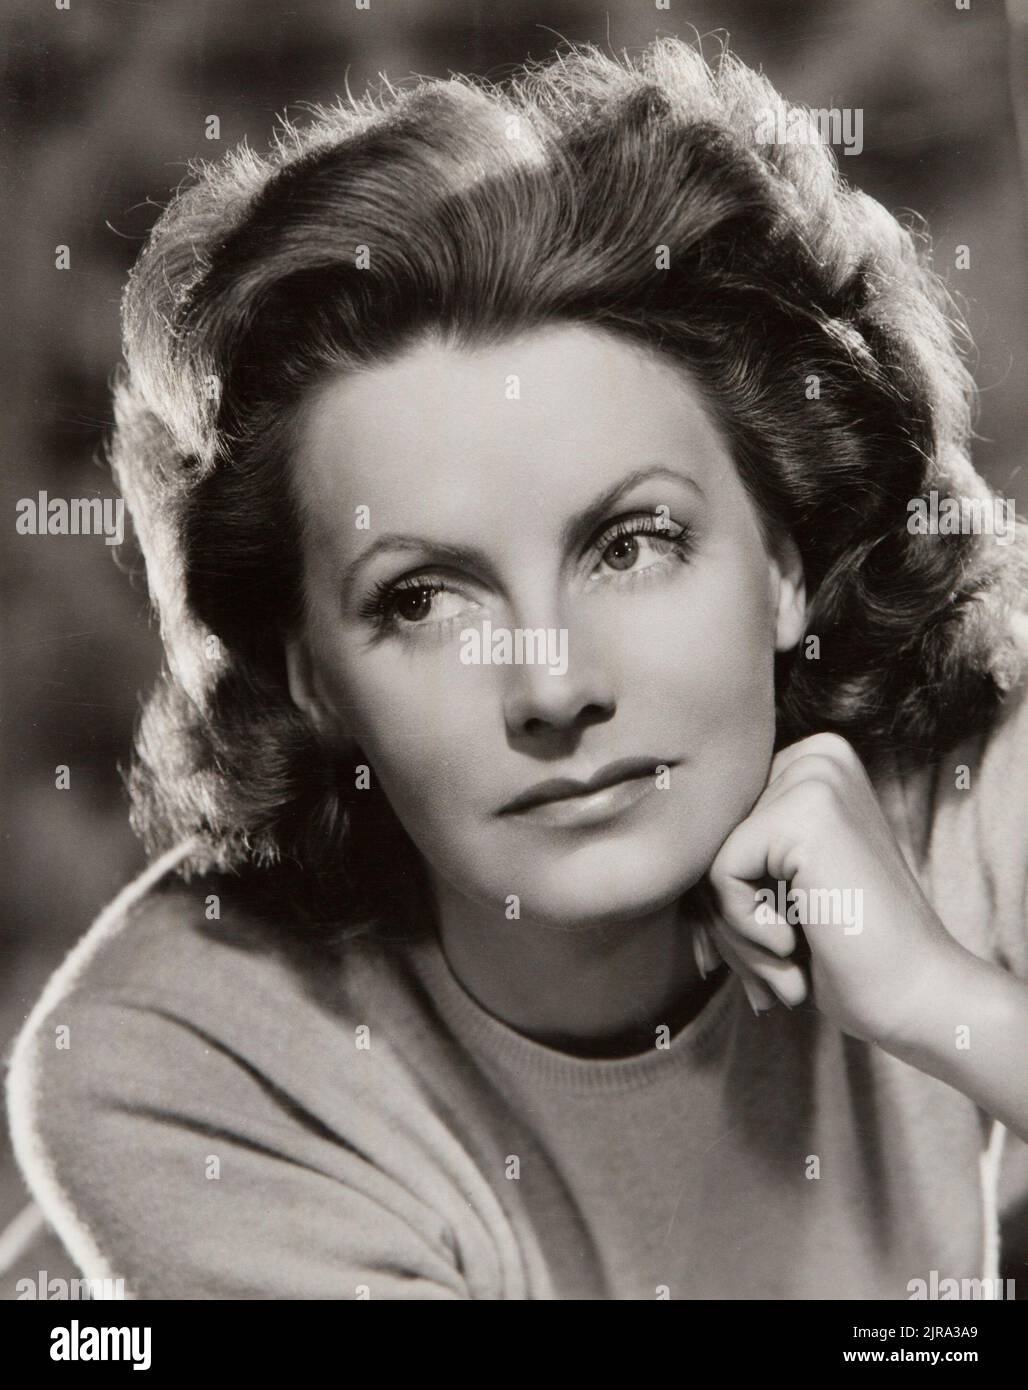 Greta Garbo in Two-Faced Woman by Clarence Bull (MGM, 1941). Portrait Photo Stock Photo